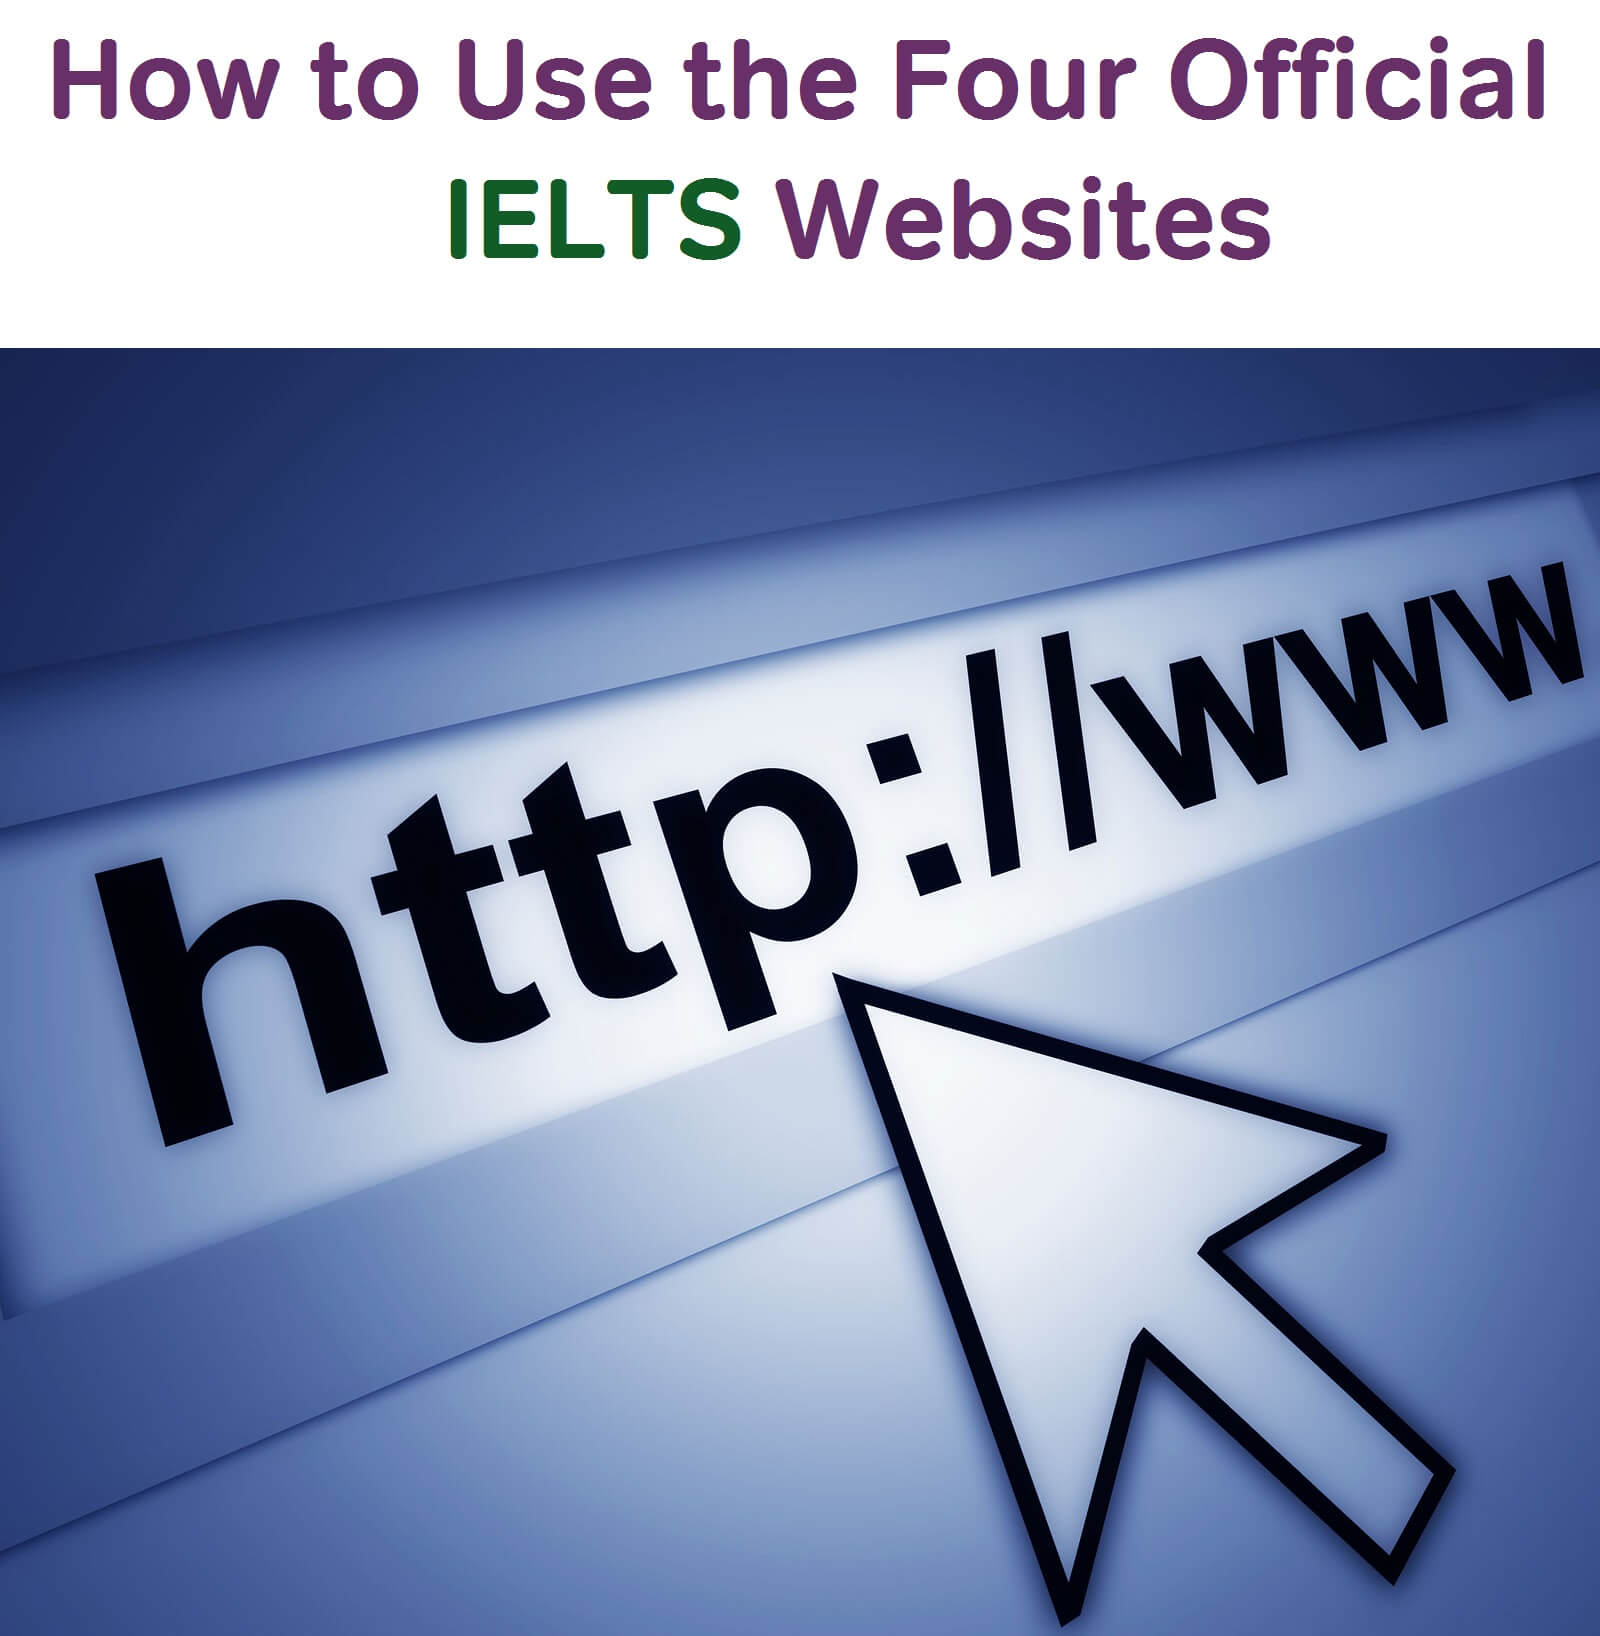 How to Use the Four Official IELTS Websites